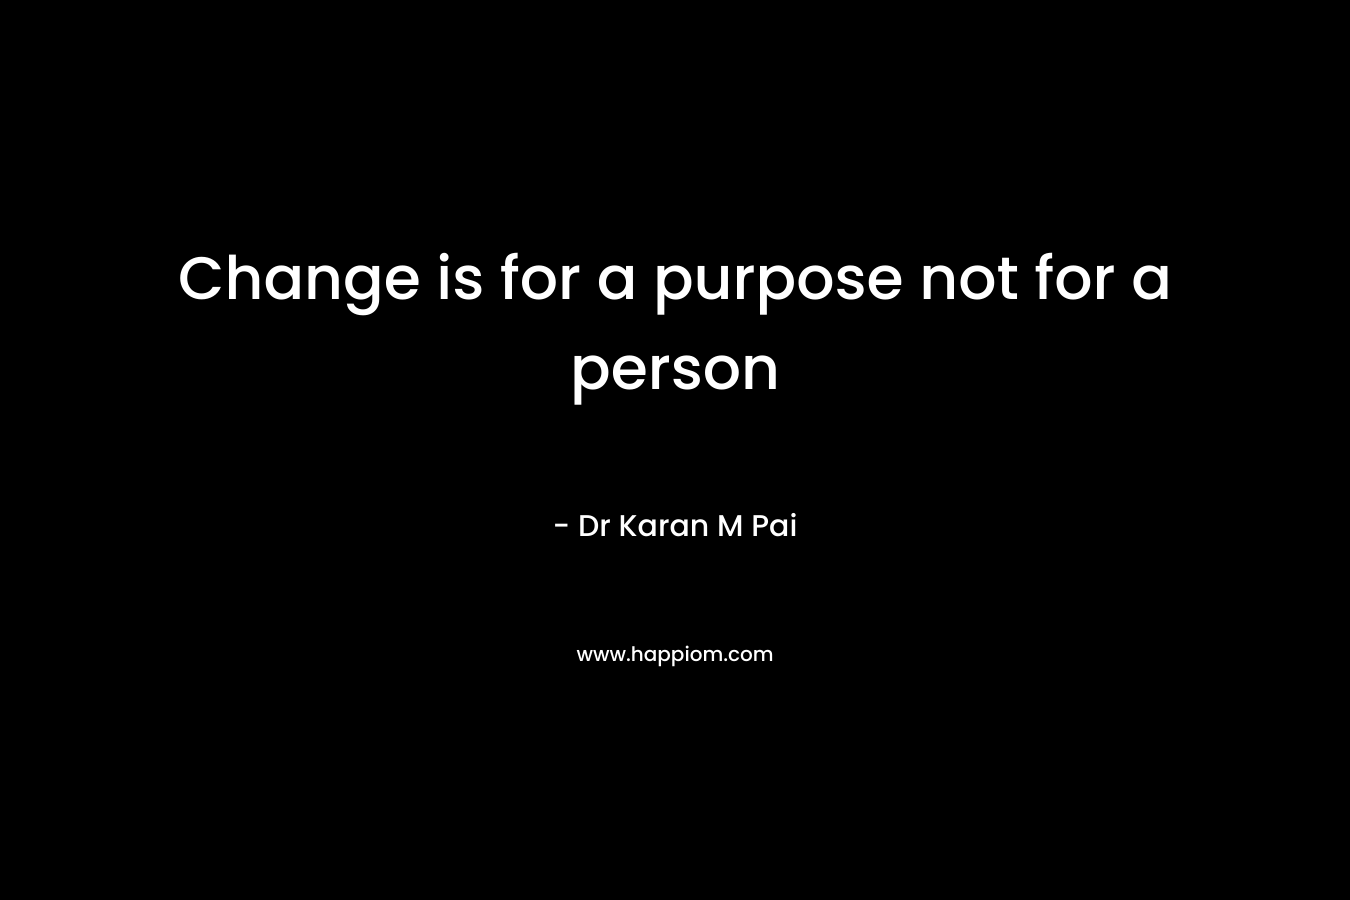 Change is for a purpose not for a person